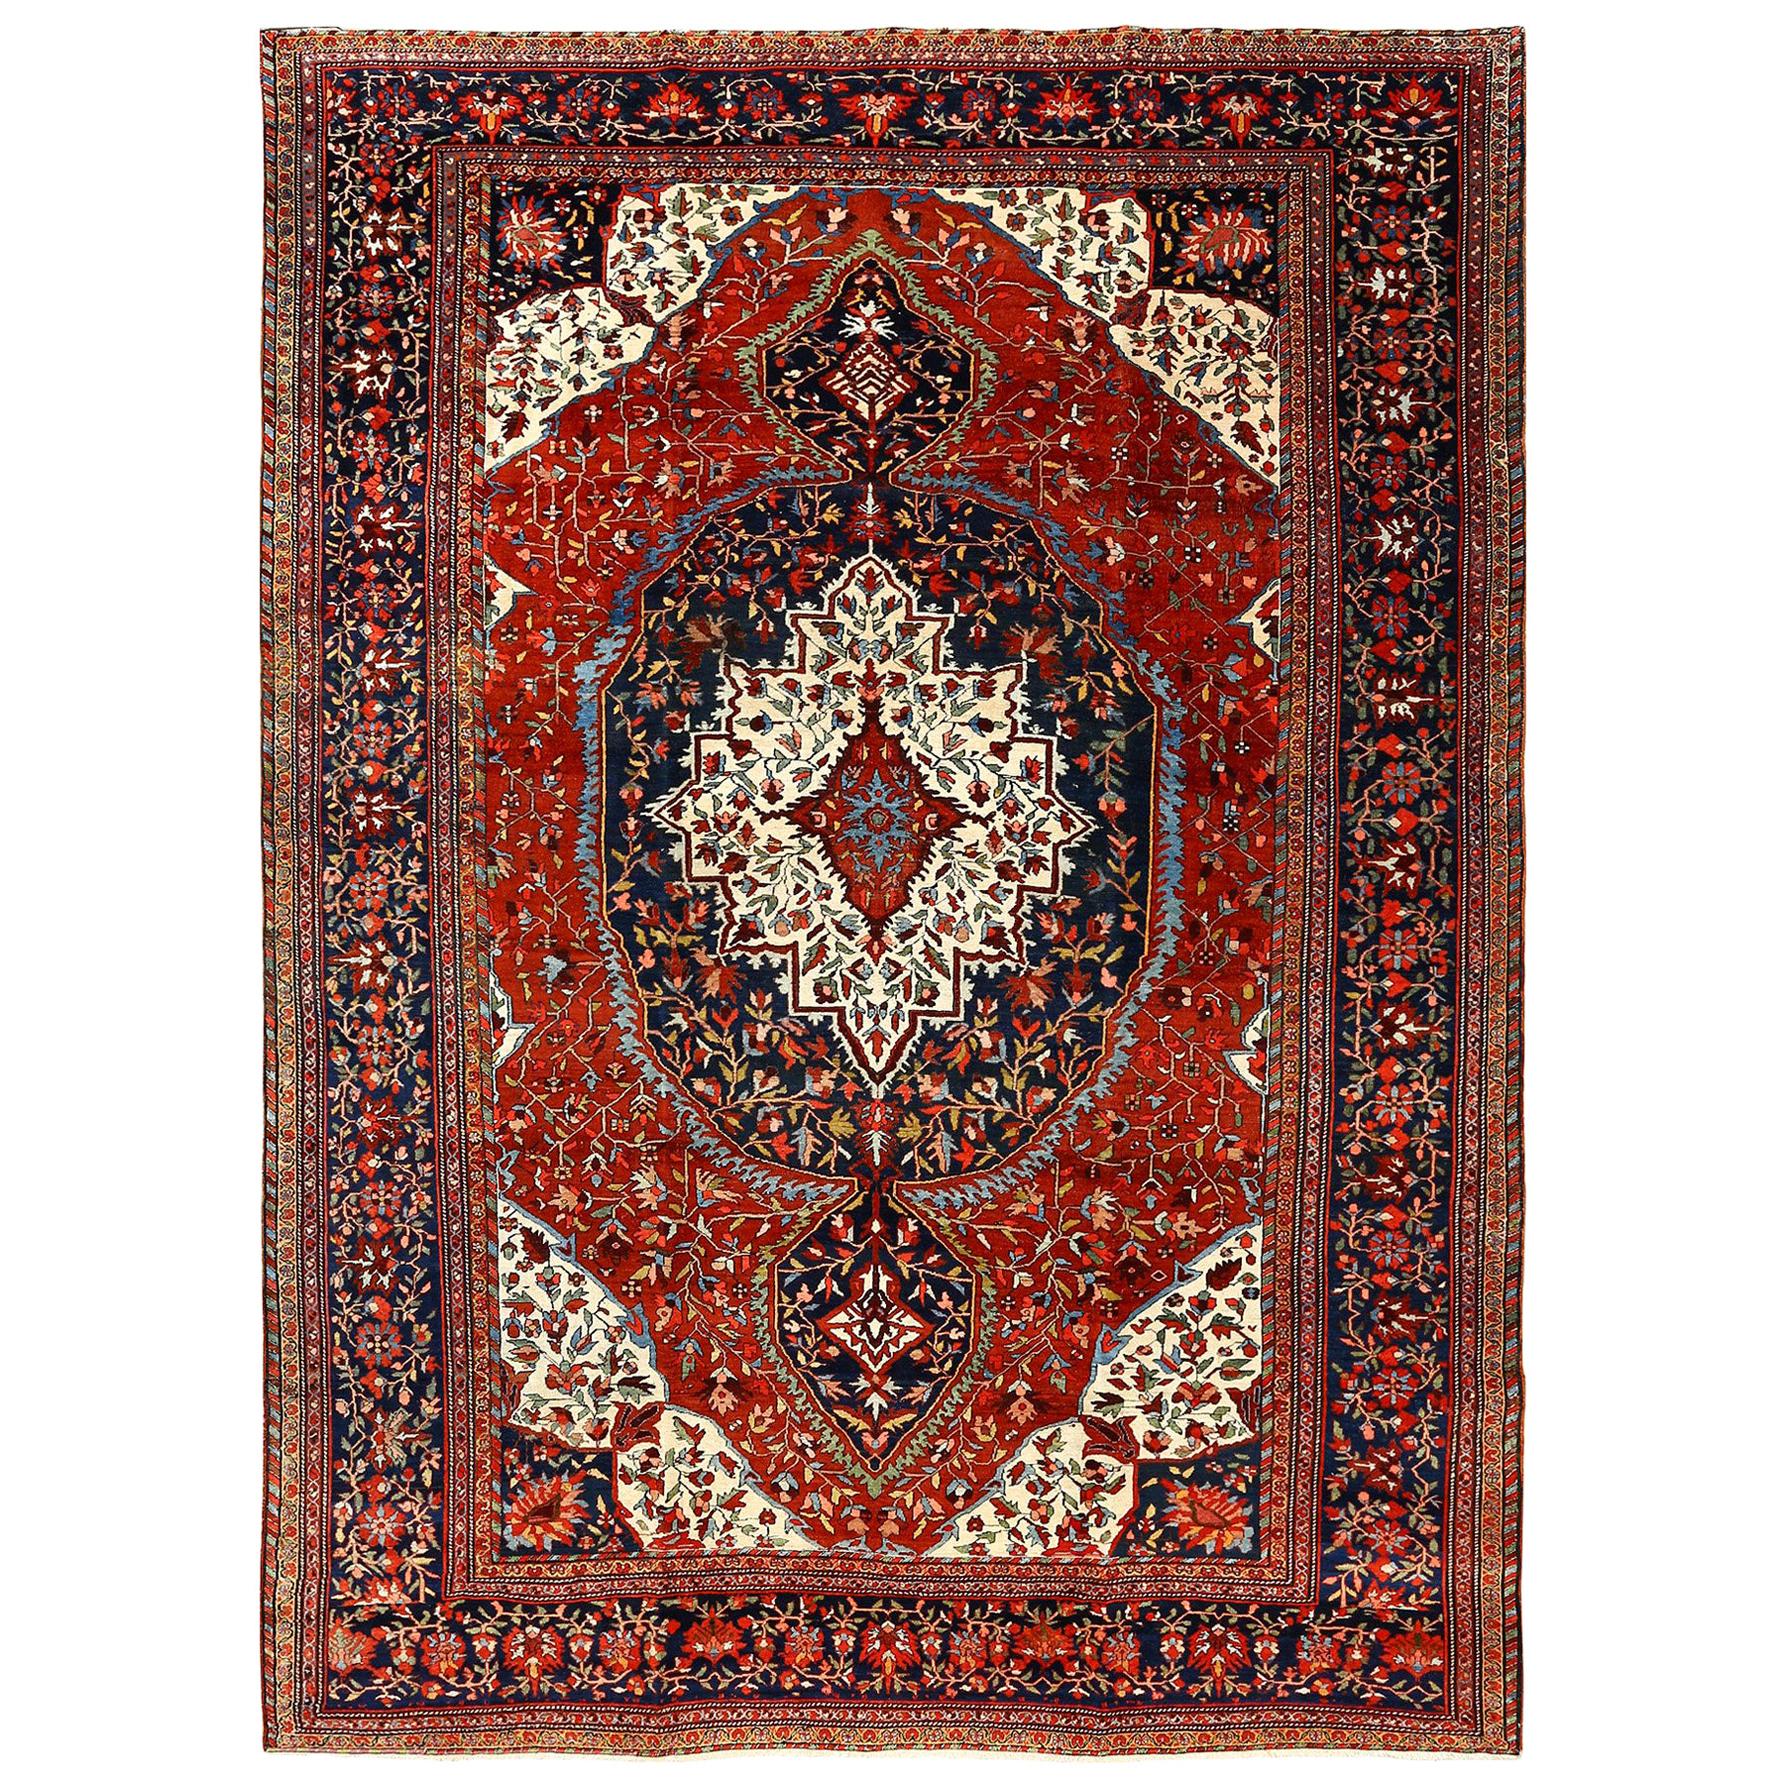 Nazmiyal Collection Antique Sarouk Farahan Persian Rug. 9 ft 2 in x 12 ft 2 in 